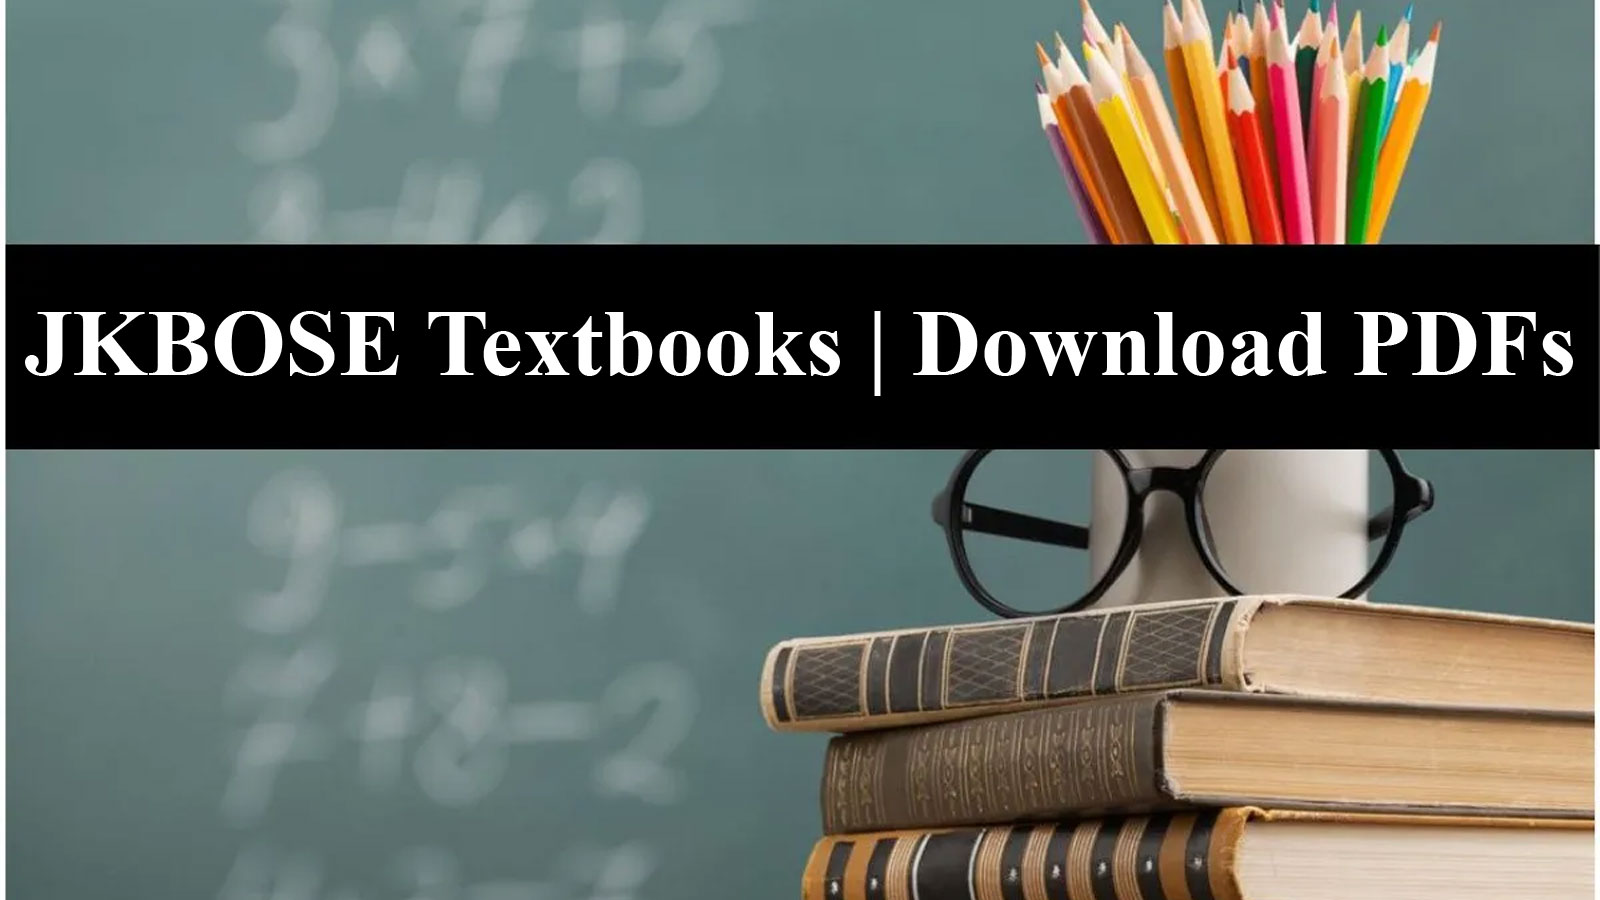 JKBOSE Class 9th Textbooks; Direct Link to Download PDFs